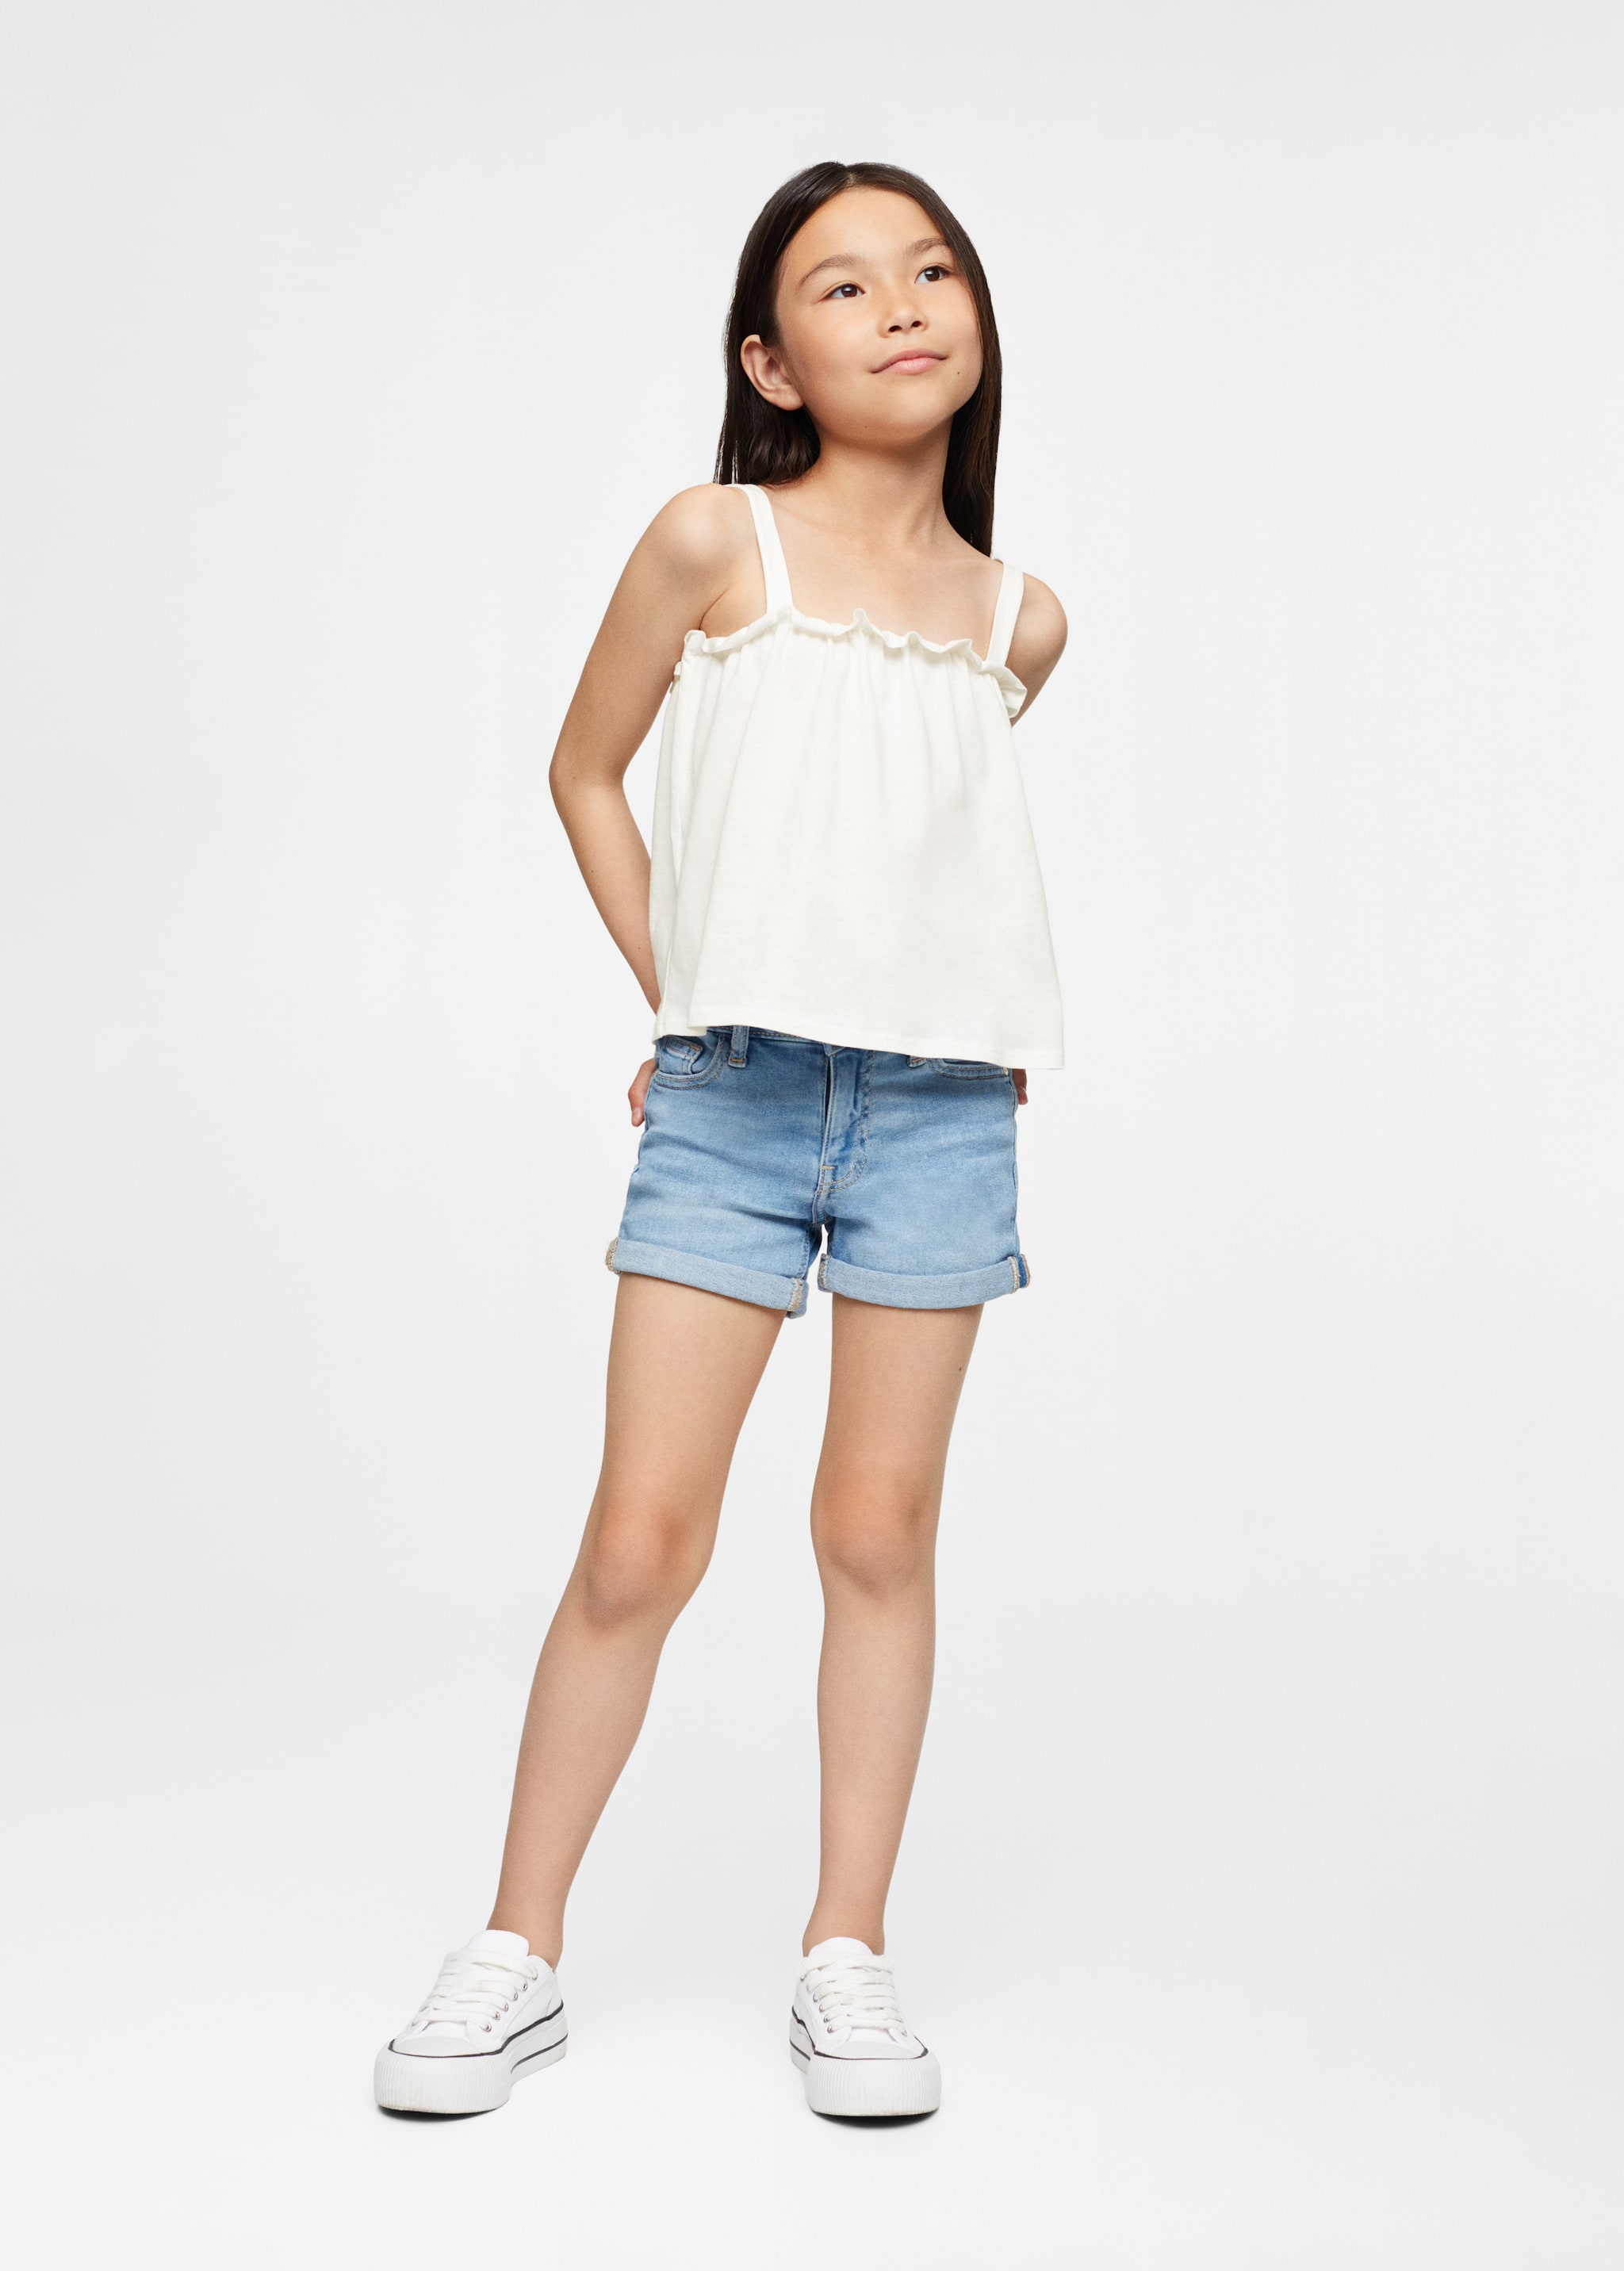 Cotton top with ruffles - General plane